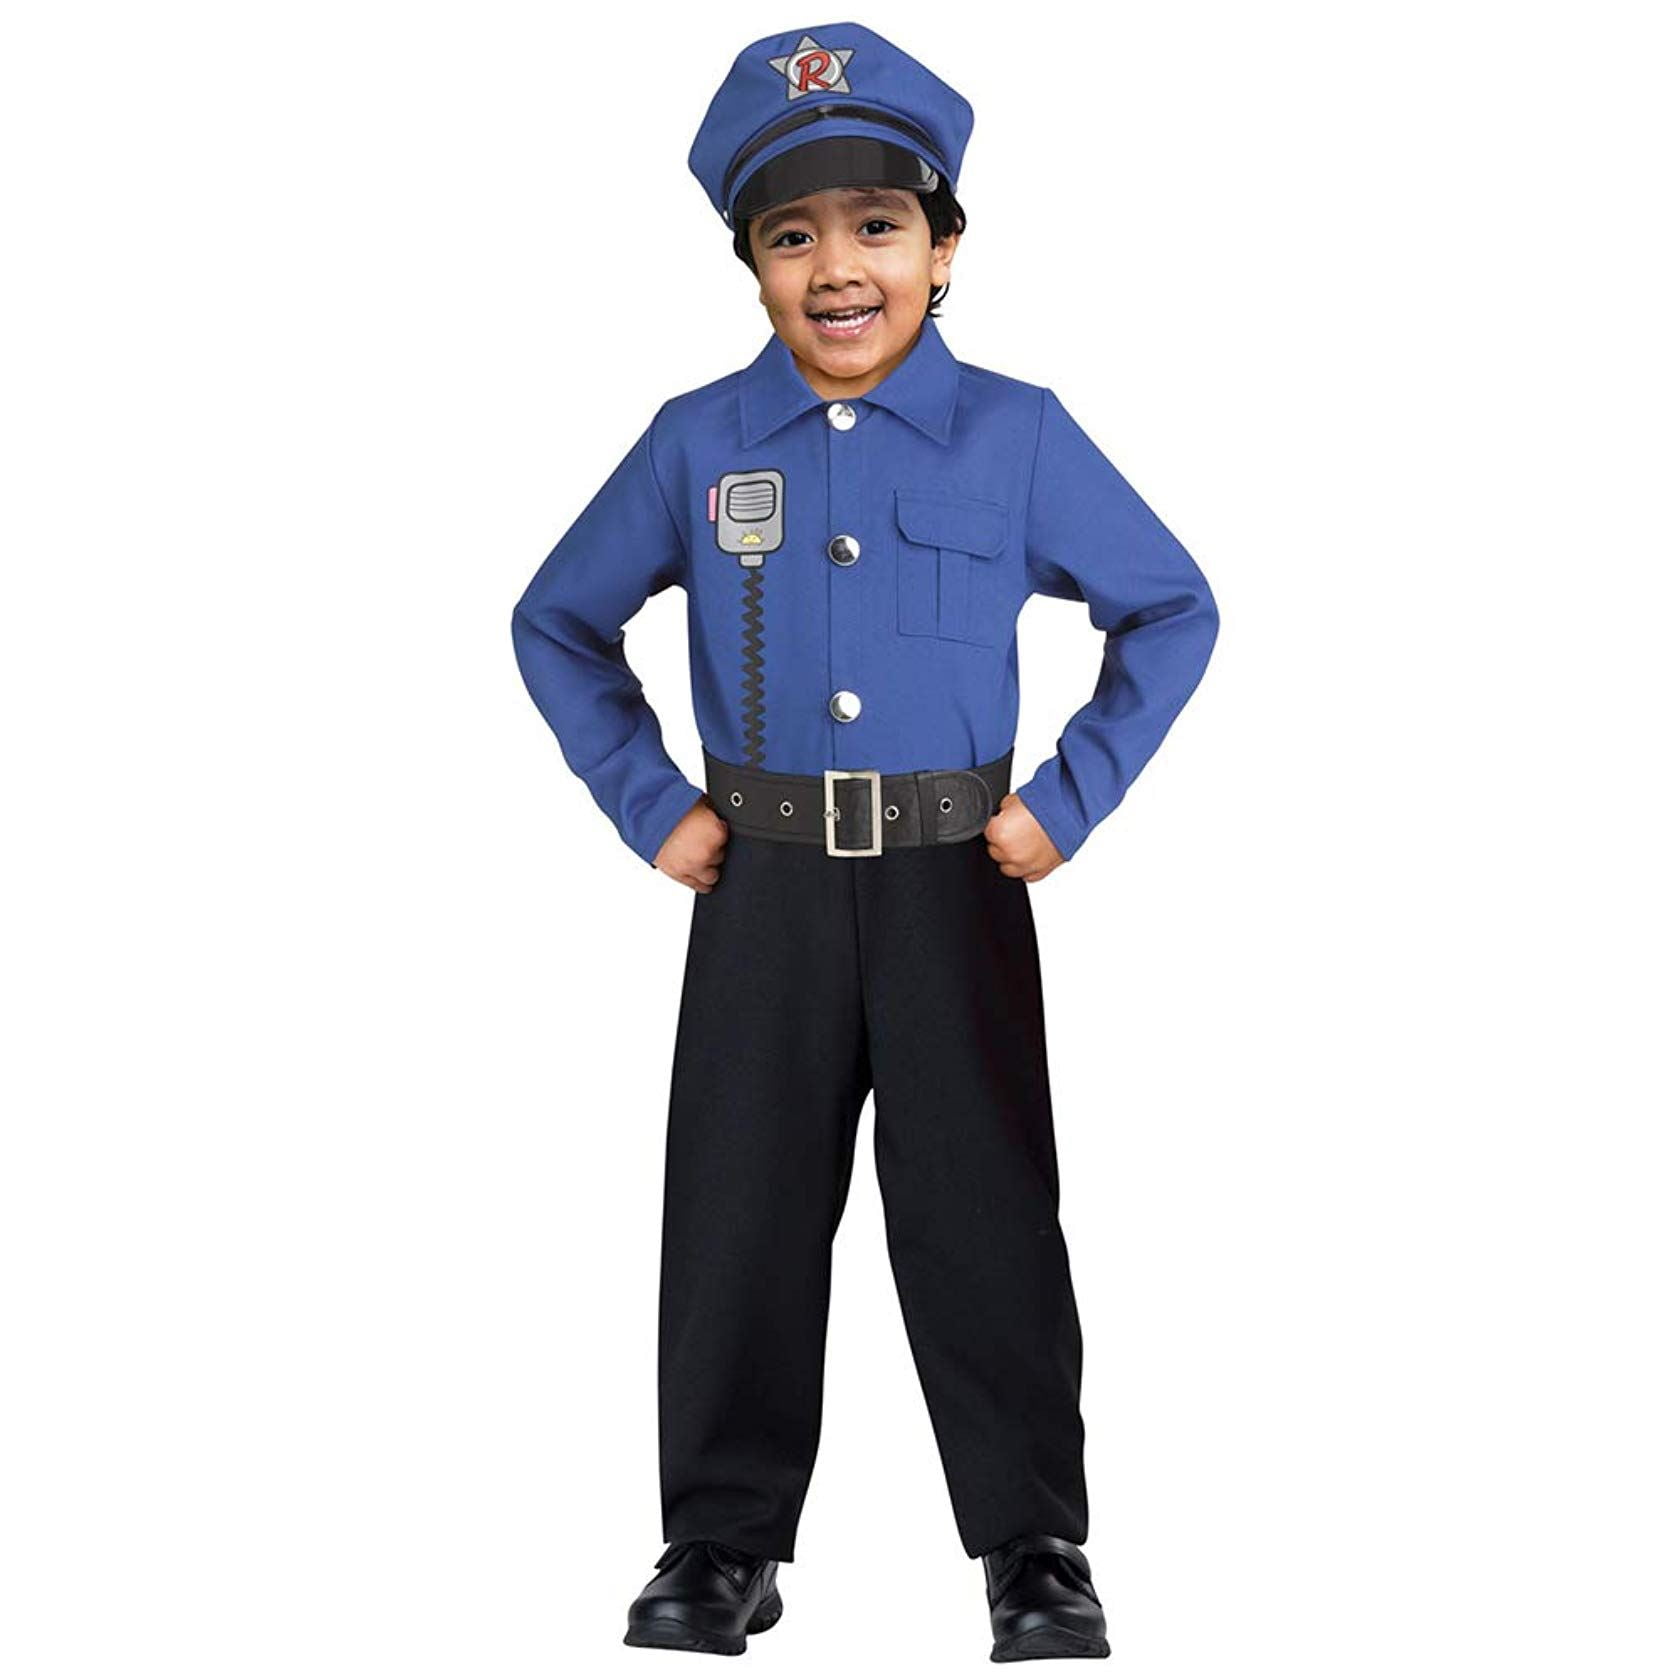 Or Girls! Size Small Policeman Halloween Costume For Little Boys 